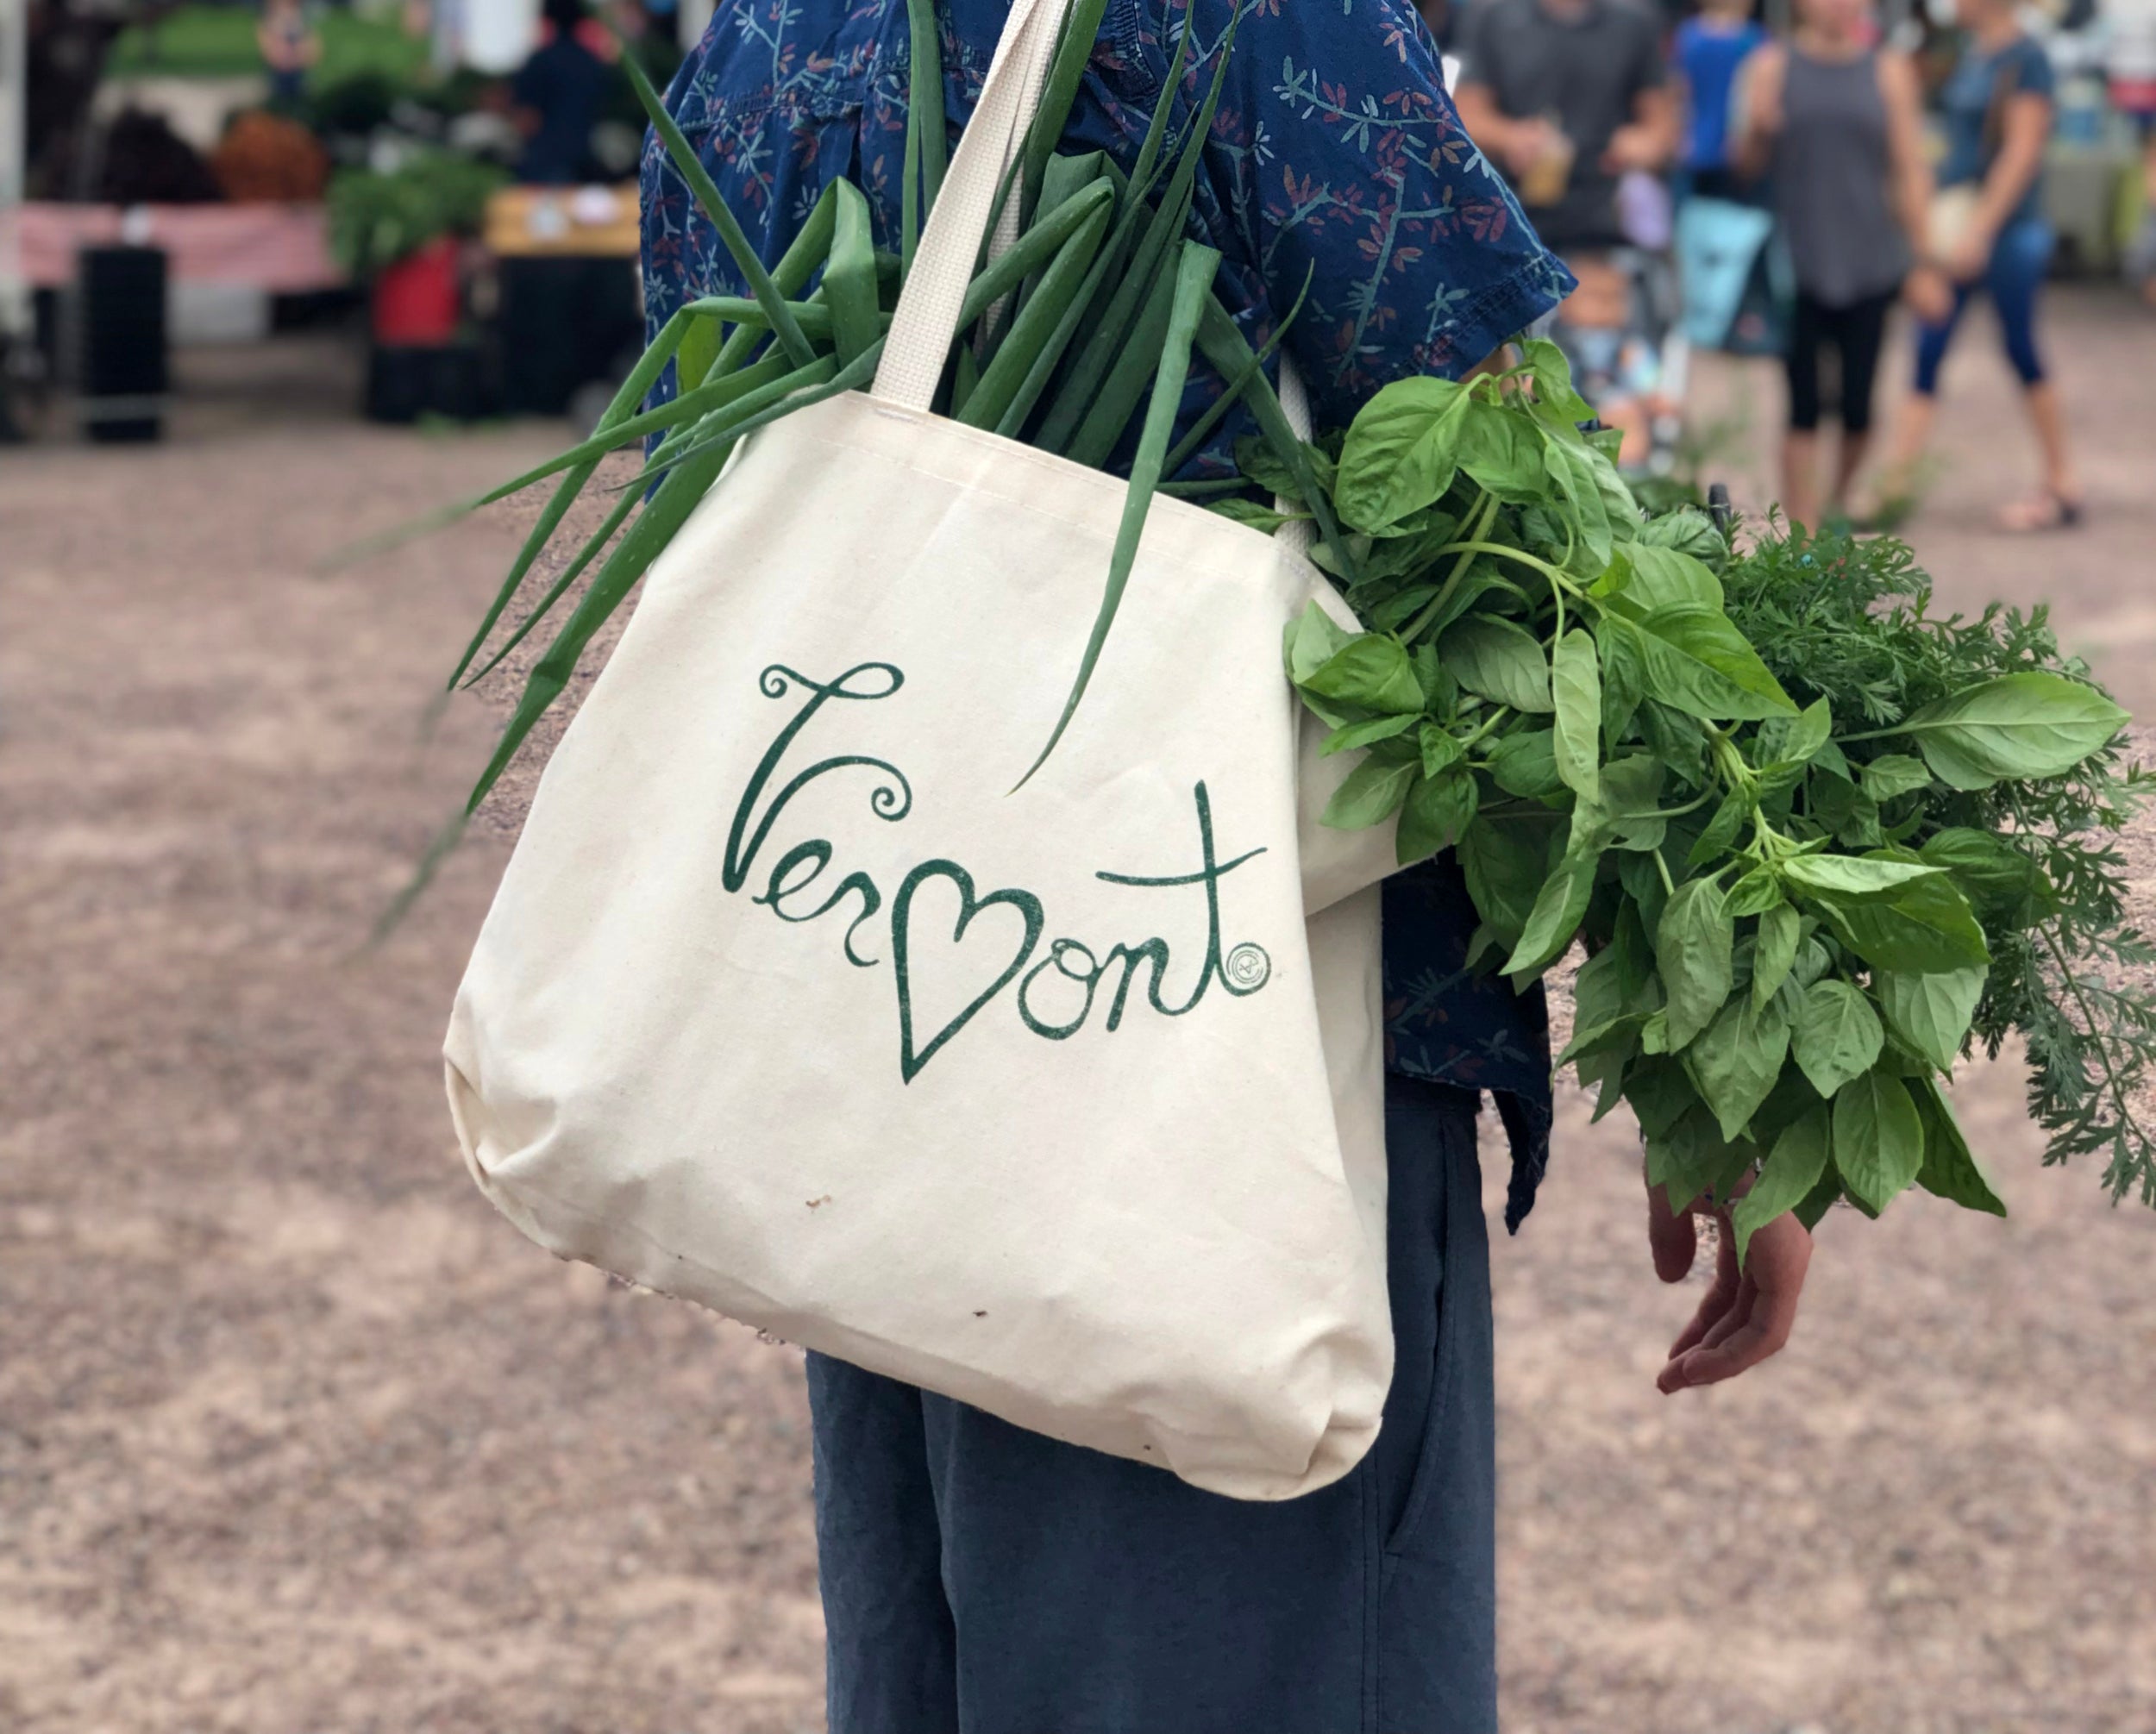 Heart of Vermont totebag filled with fresh produce from the Burlington Farmer's Market